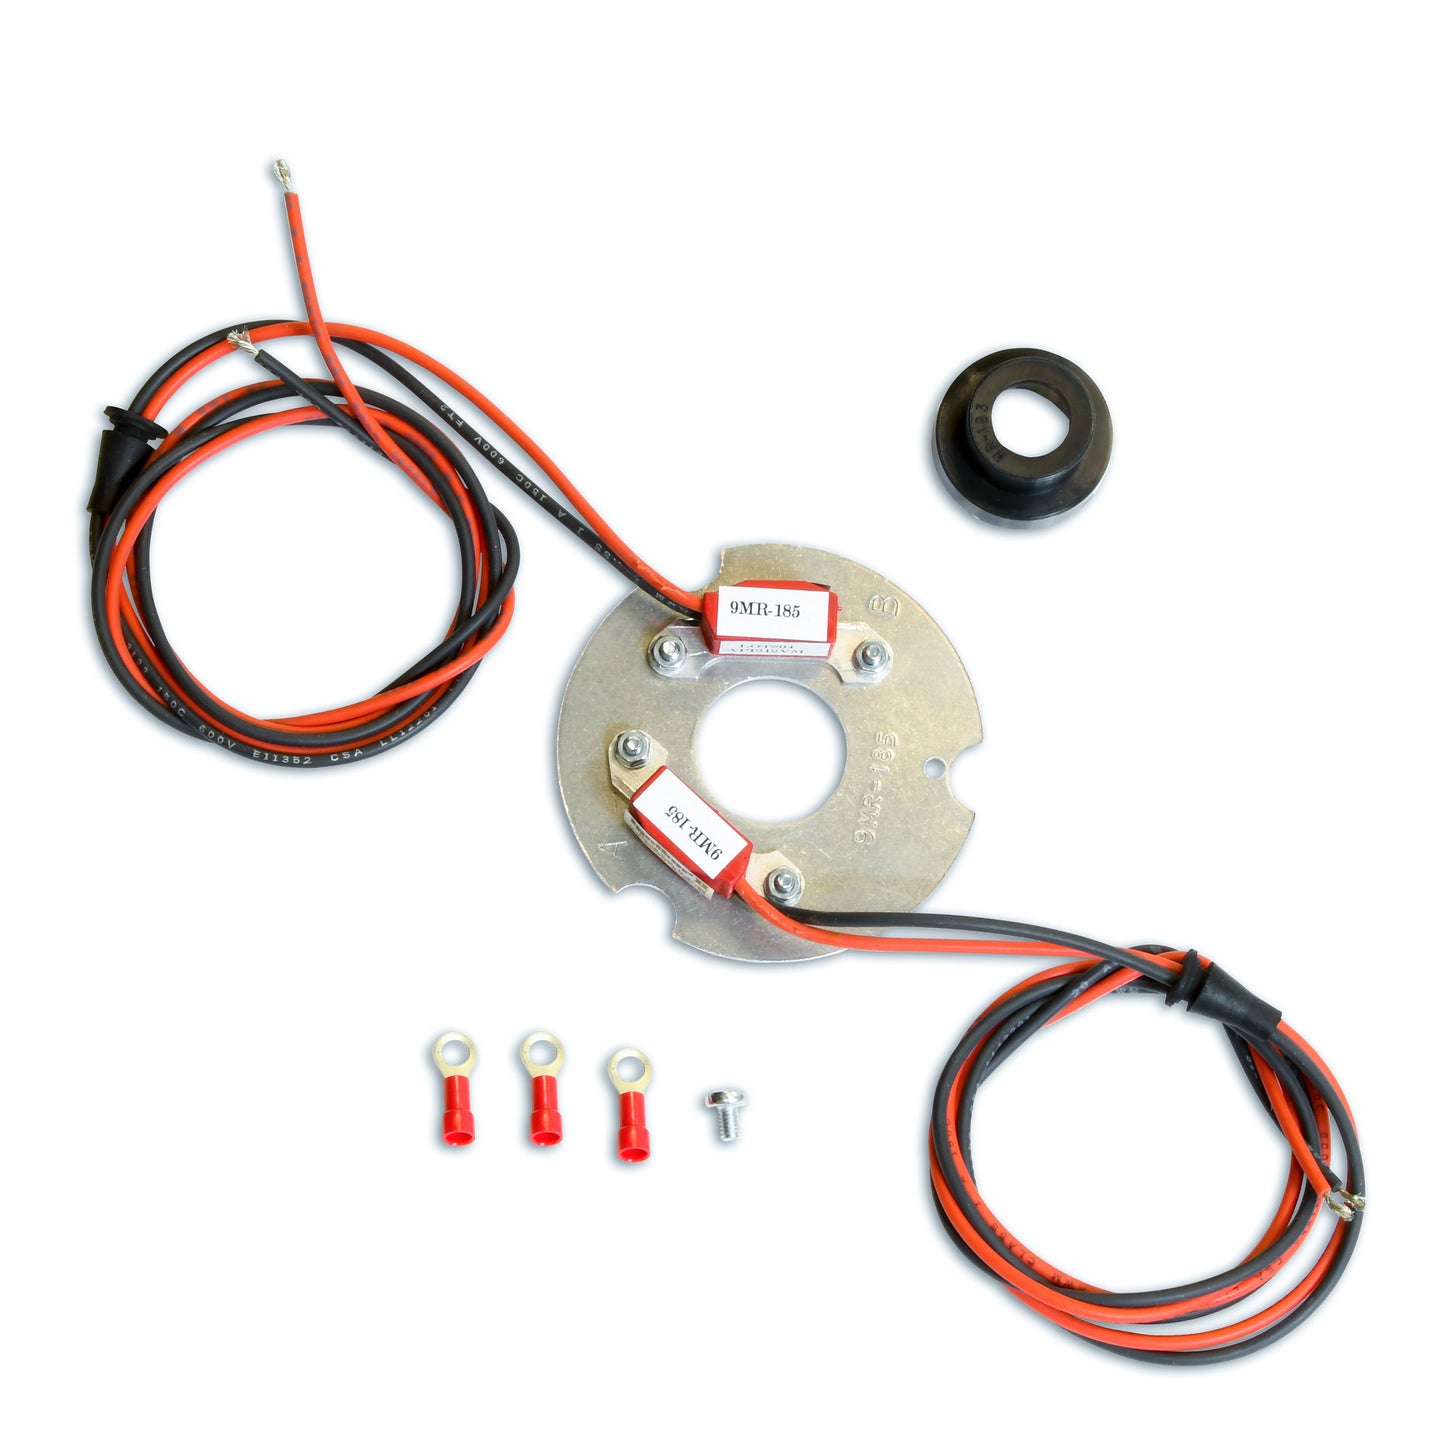 PerTronix 9MR-185 Ignitor® Marelli, 8 cyl Electronic Ignition Conversion Kit